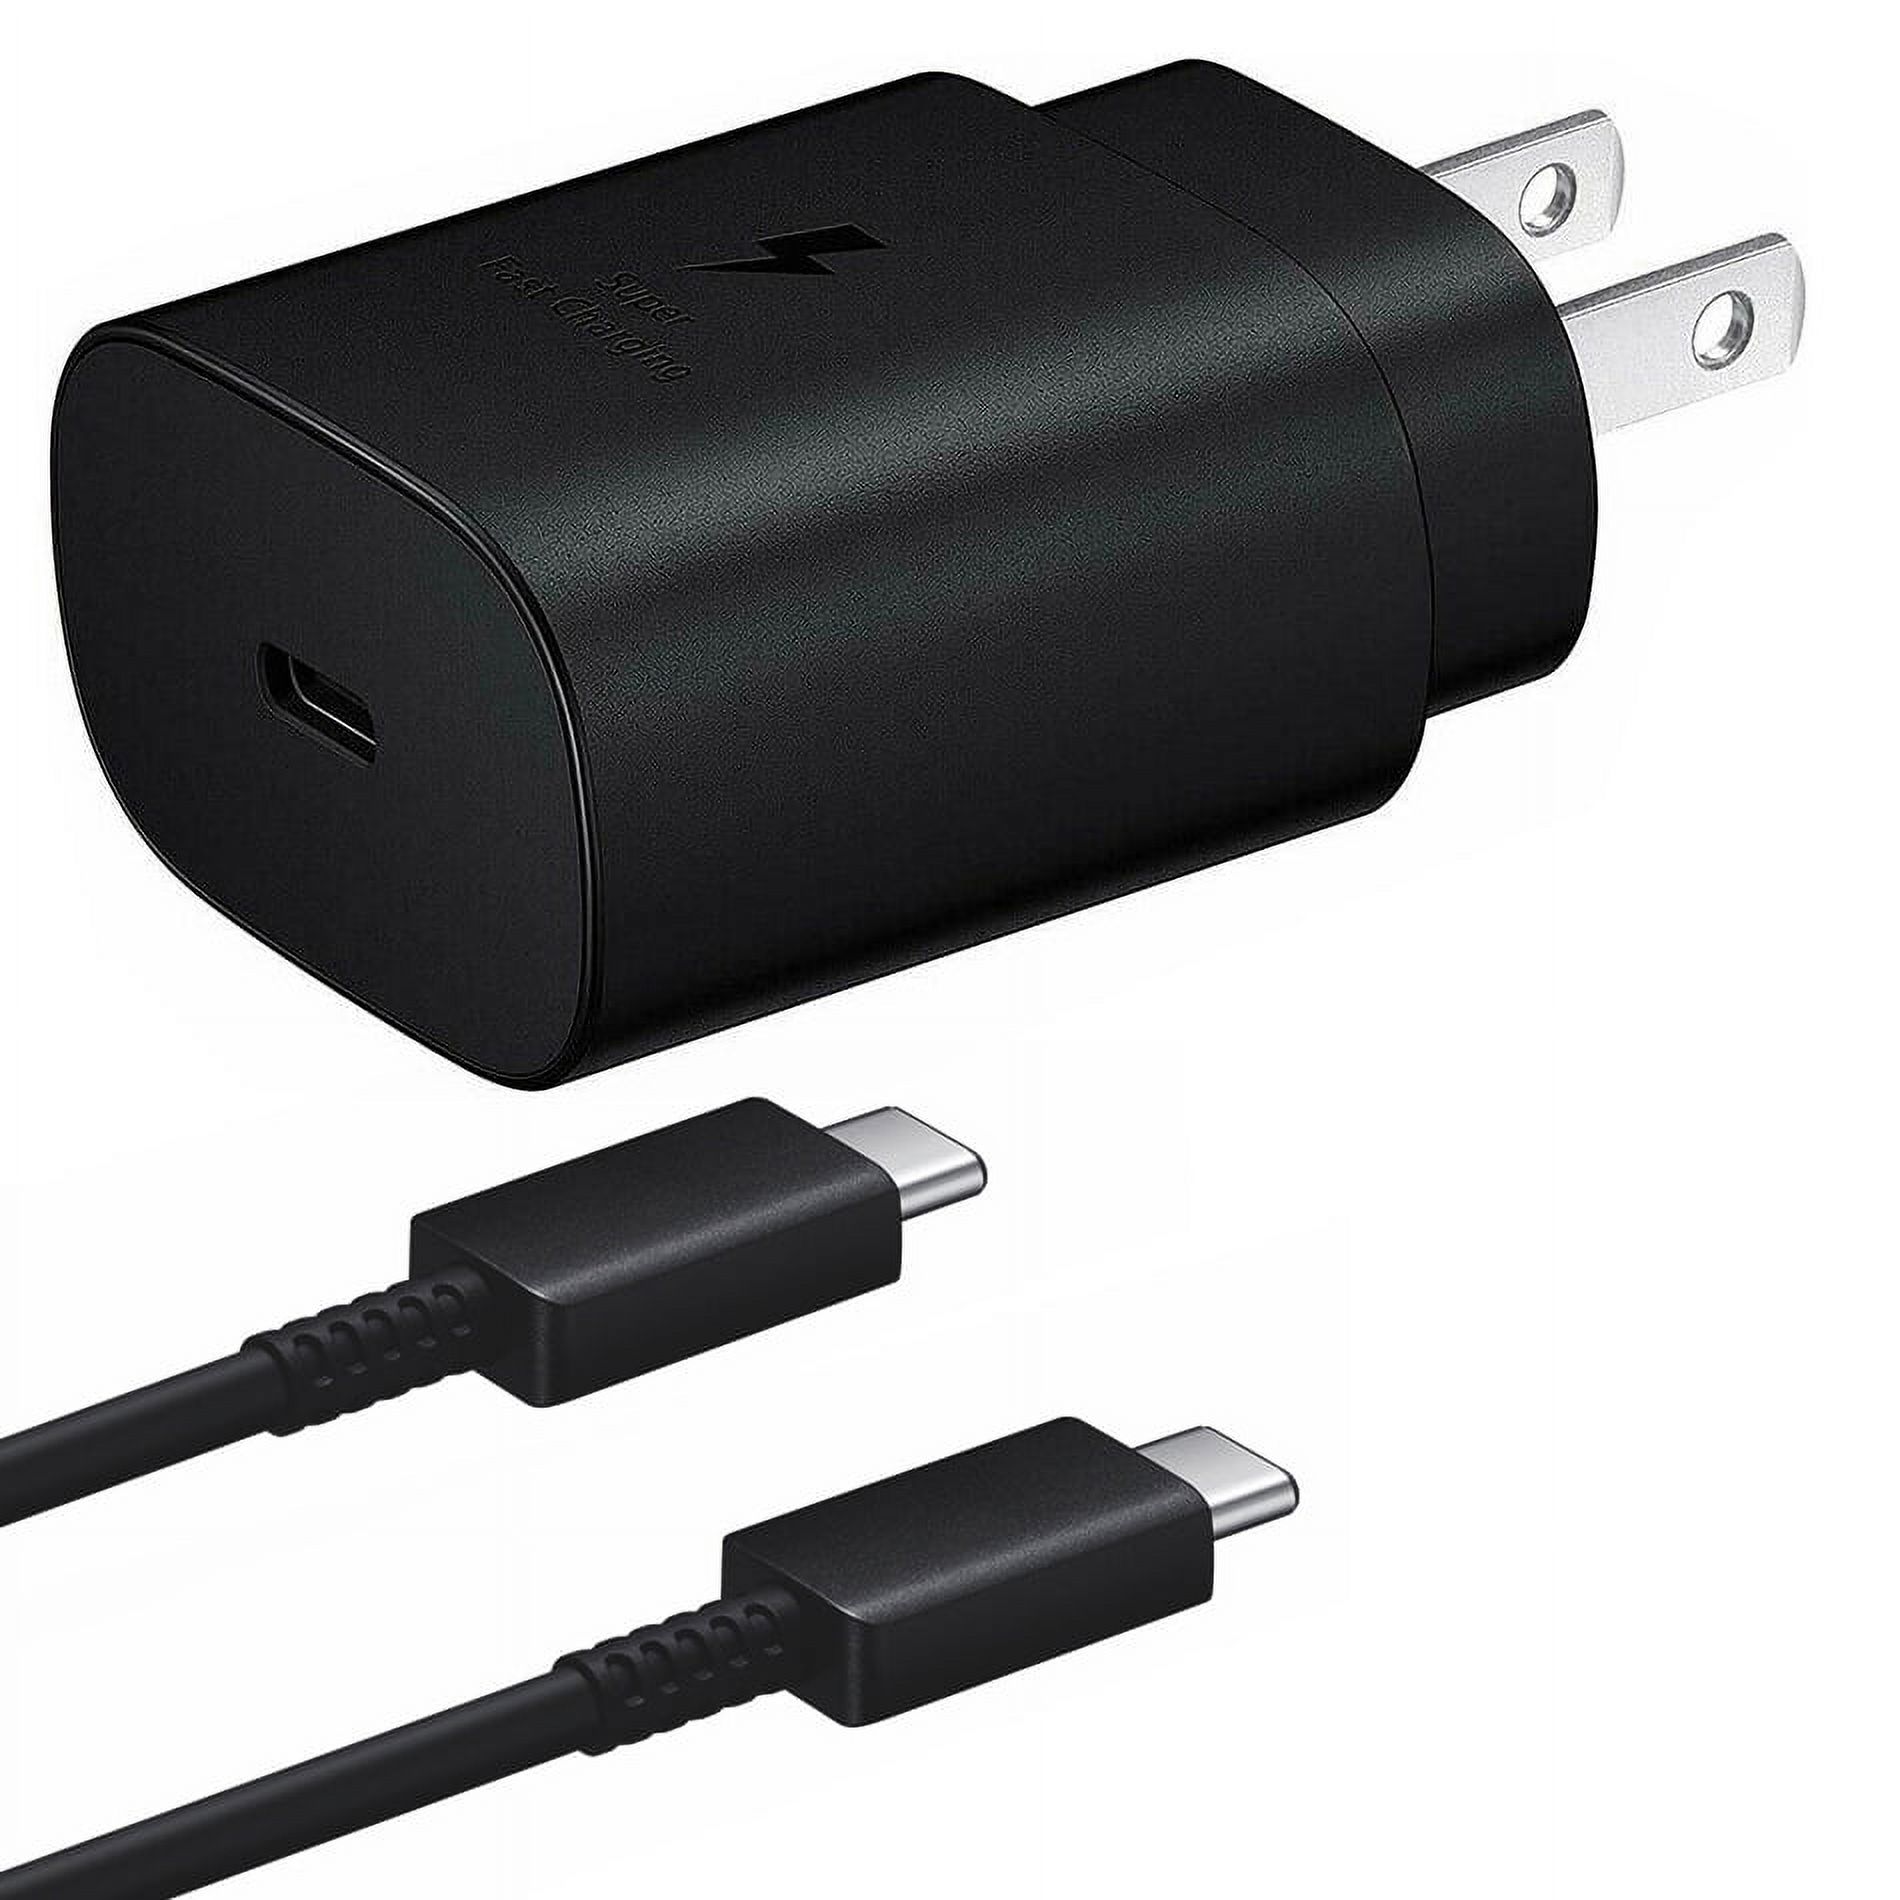 Samsung OEM Adaptive Super Fast Charger for Samsung Galaxy S20 S20+ Plus S20 Ultra S21 S21+ Ultra Note10 Note20 Real 25W USB Super Fast Wall Charger Adapter + 3FT USB-C Type C Cable Cord Kit - image 3 of 5